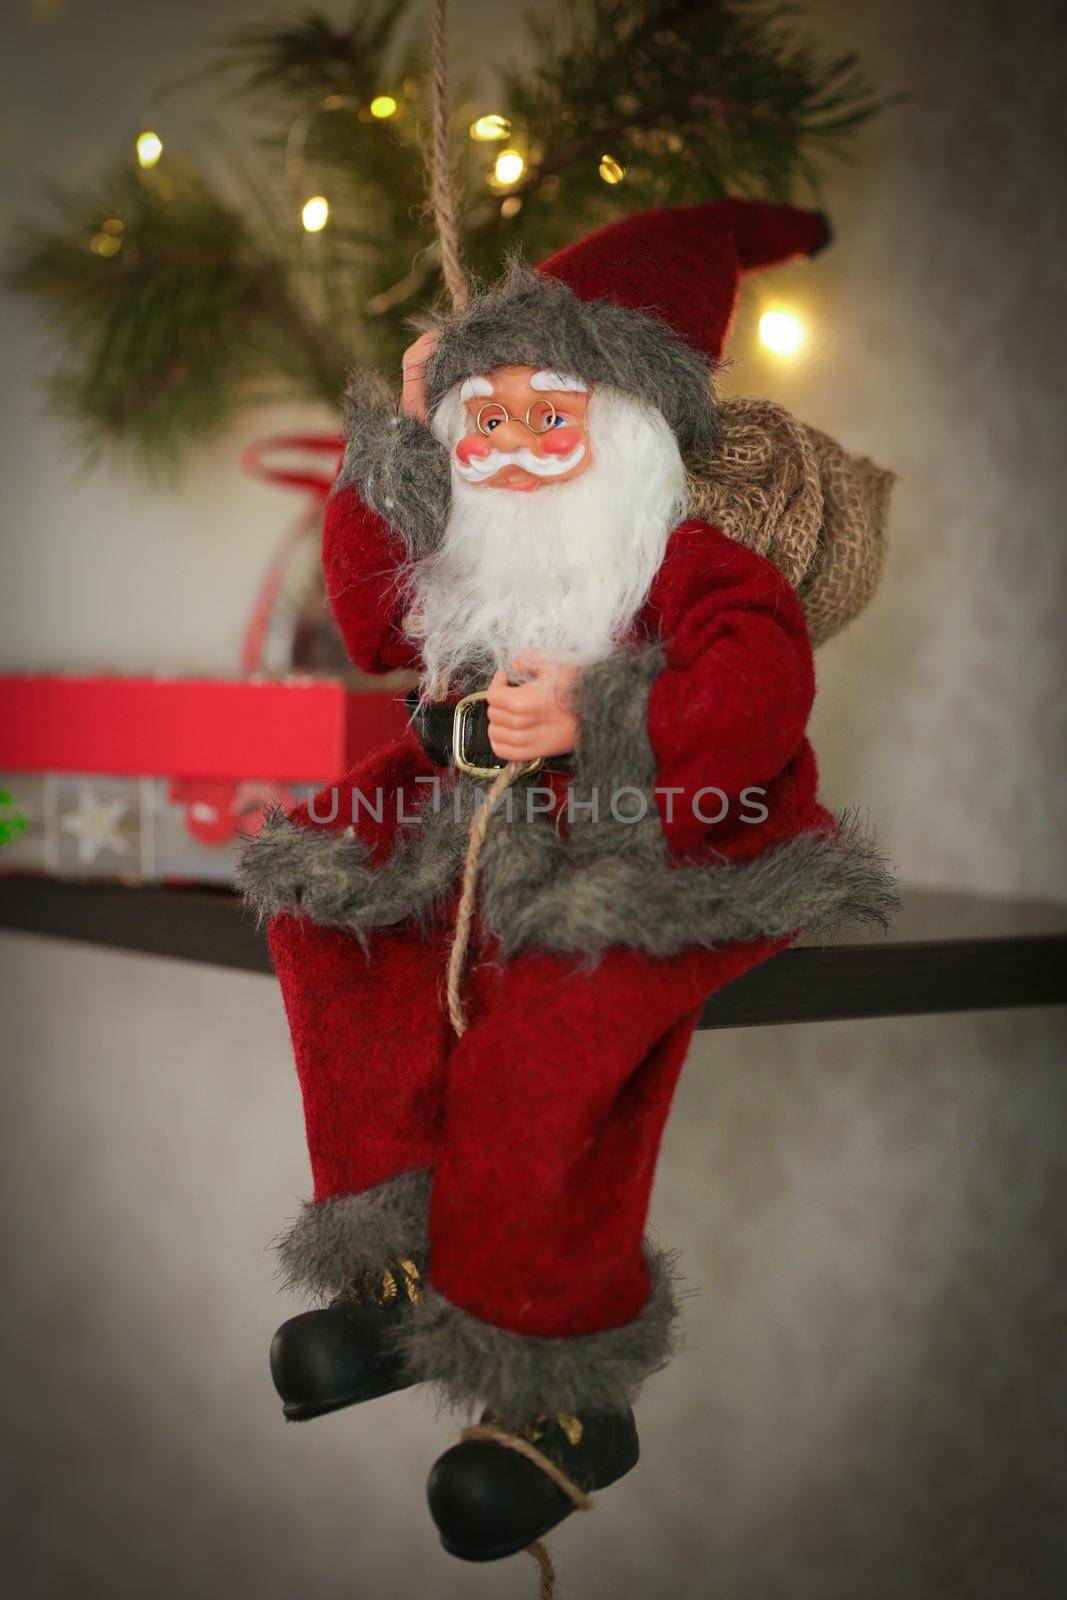 Toy Santa Claus with gifts and Christmas Decorations by clusterx